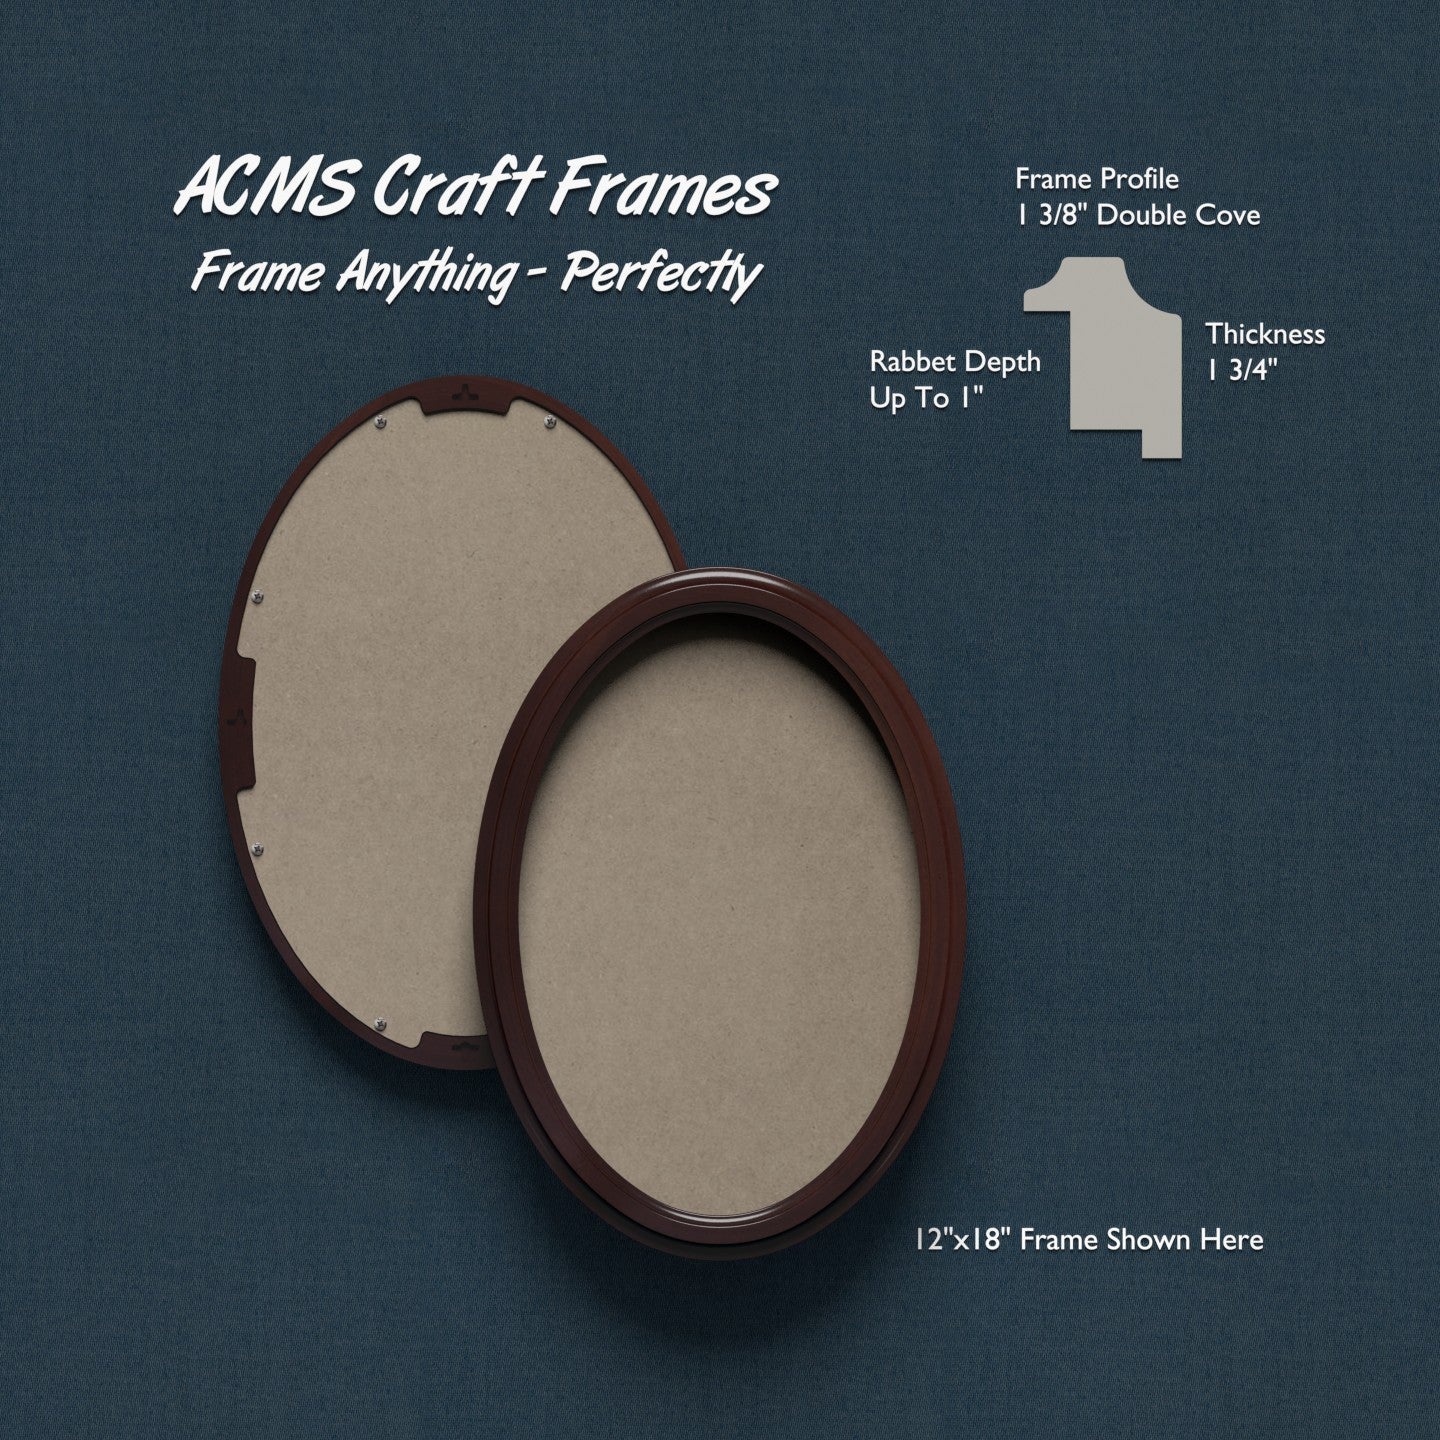 Oval Craft Frame - 1 3/4" Thick - 1 3/8" DOUBLE COVE Profile